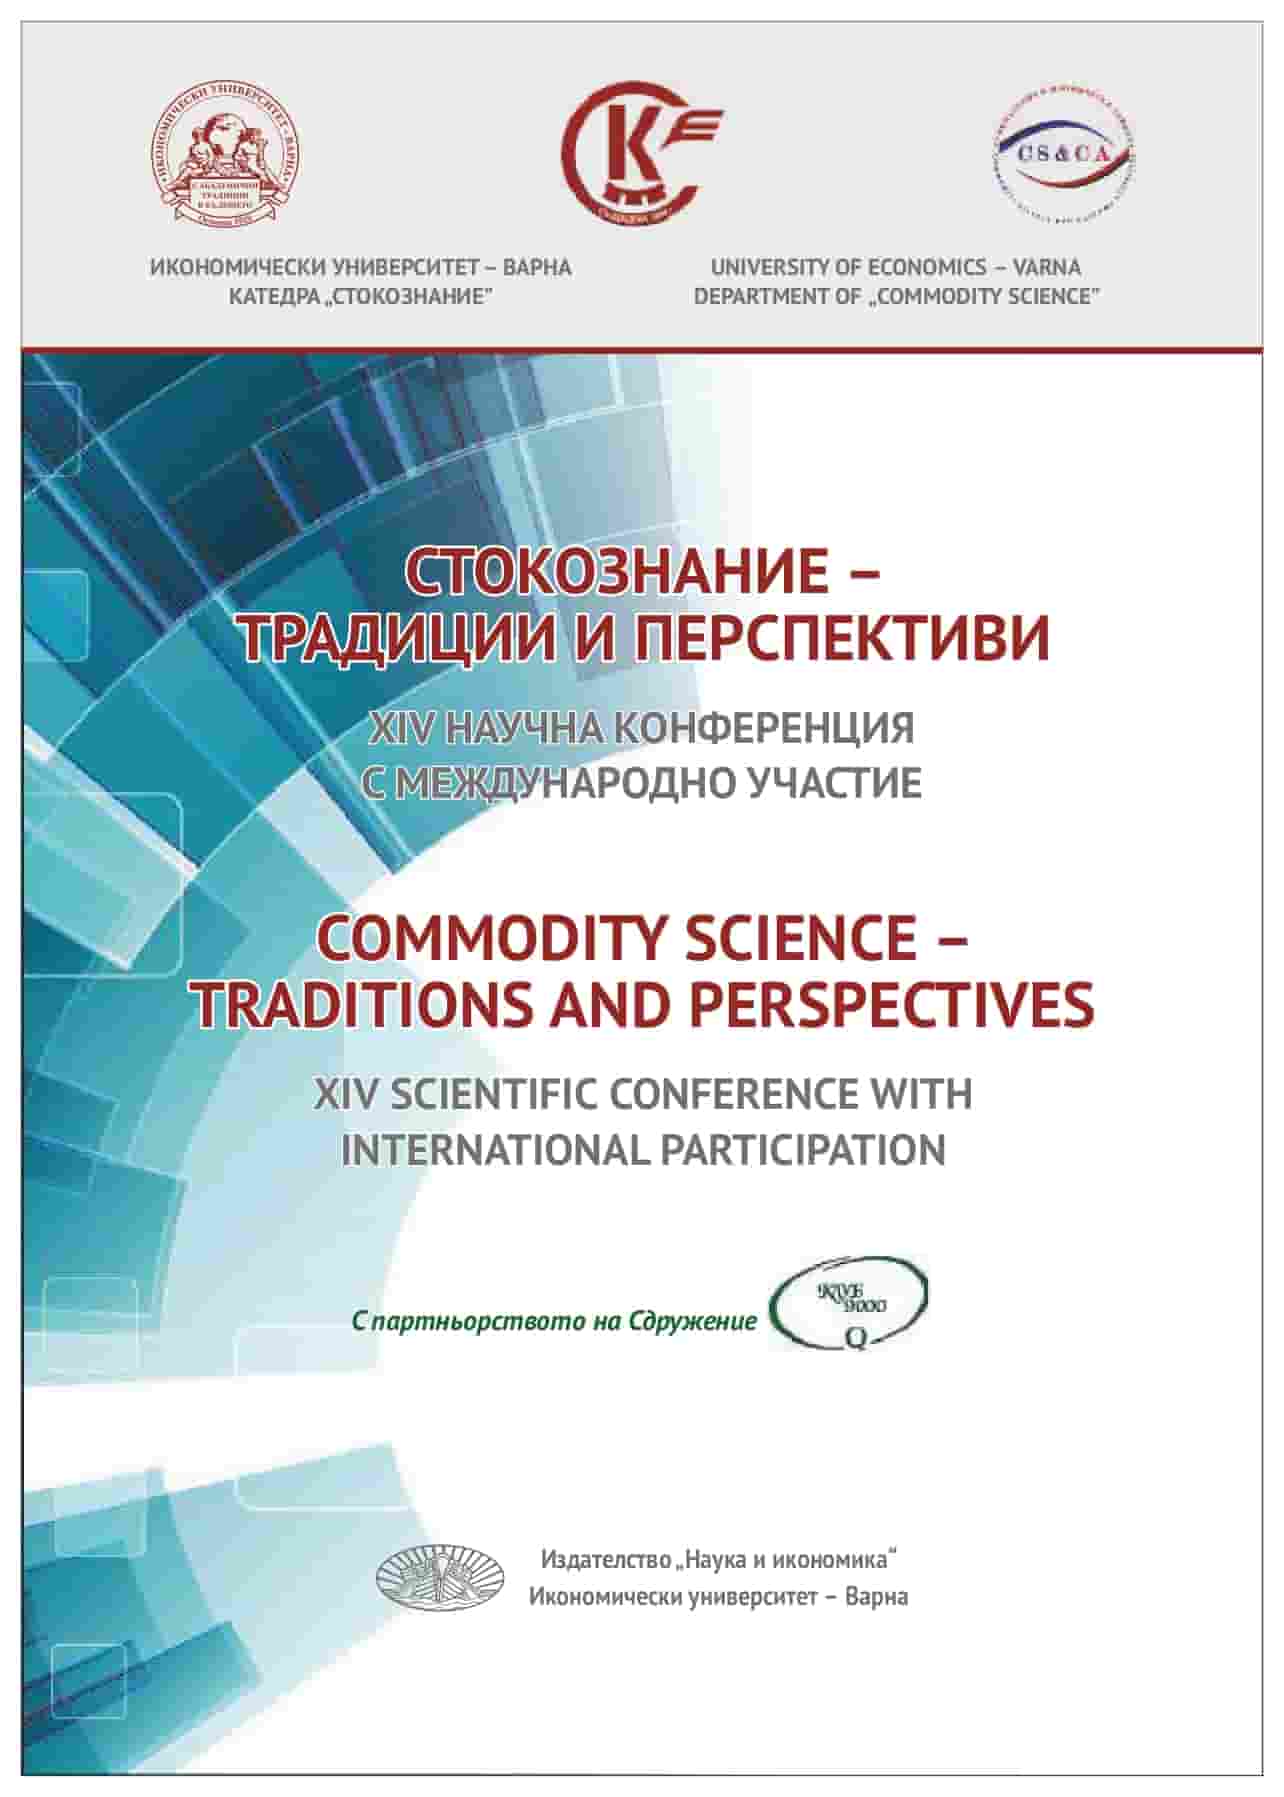 CREATION AND 75 YEARS OF DEPARTMENT OF THE DEPARTMENT AND SPECIALTY "COMMODITY SCIENCE" IN BULGARIA